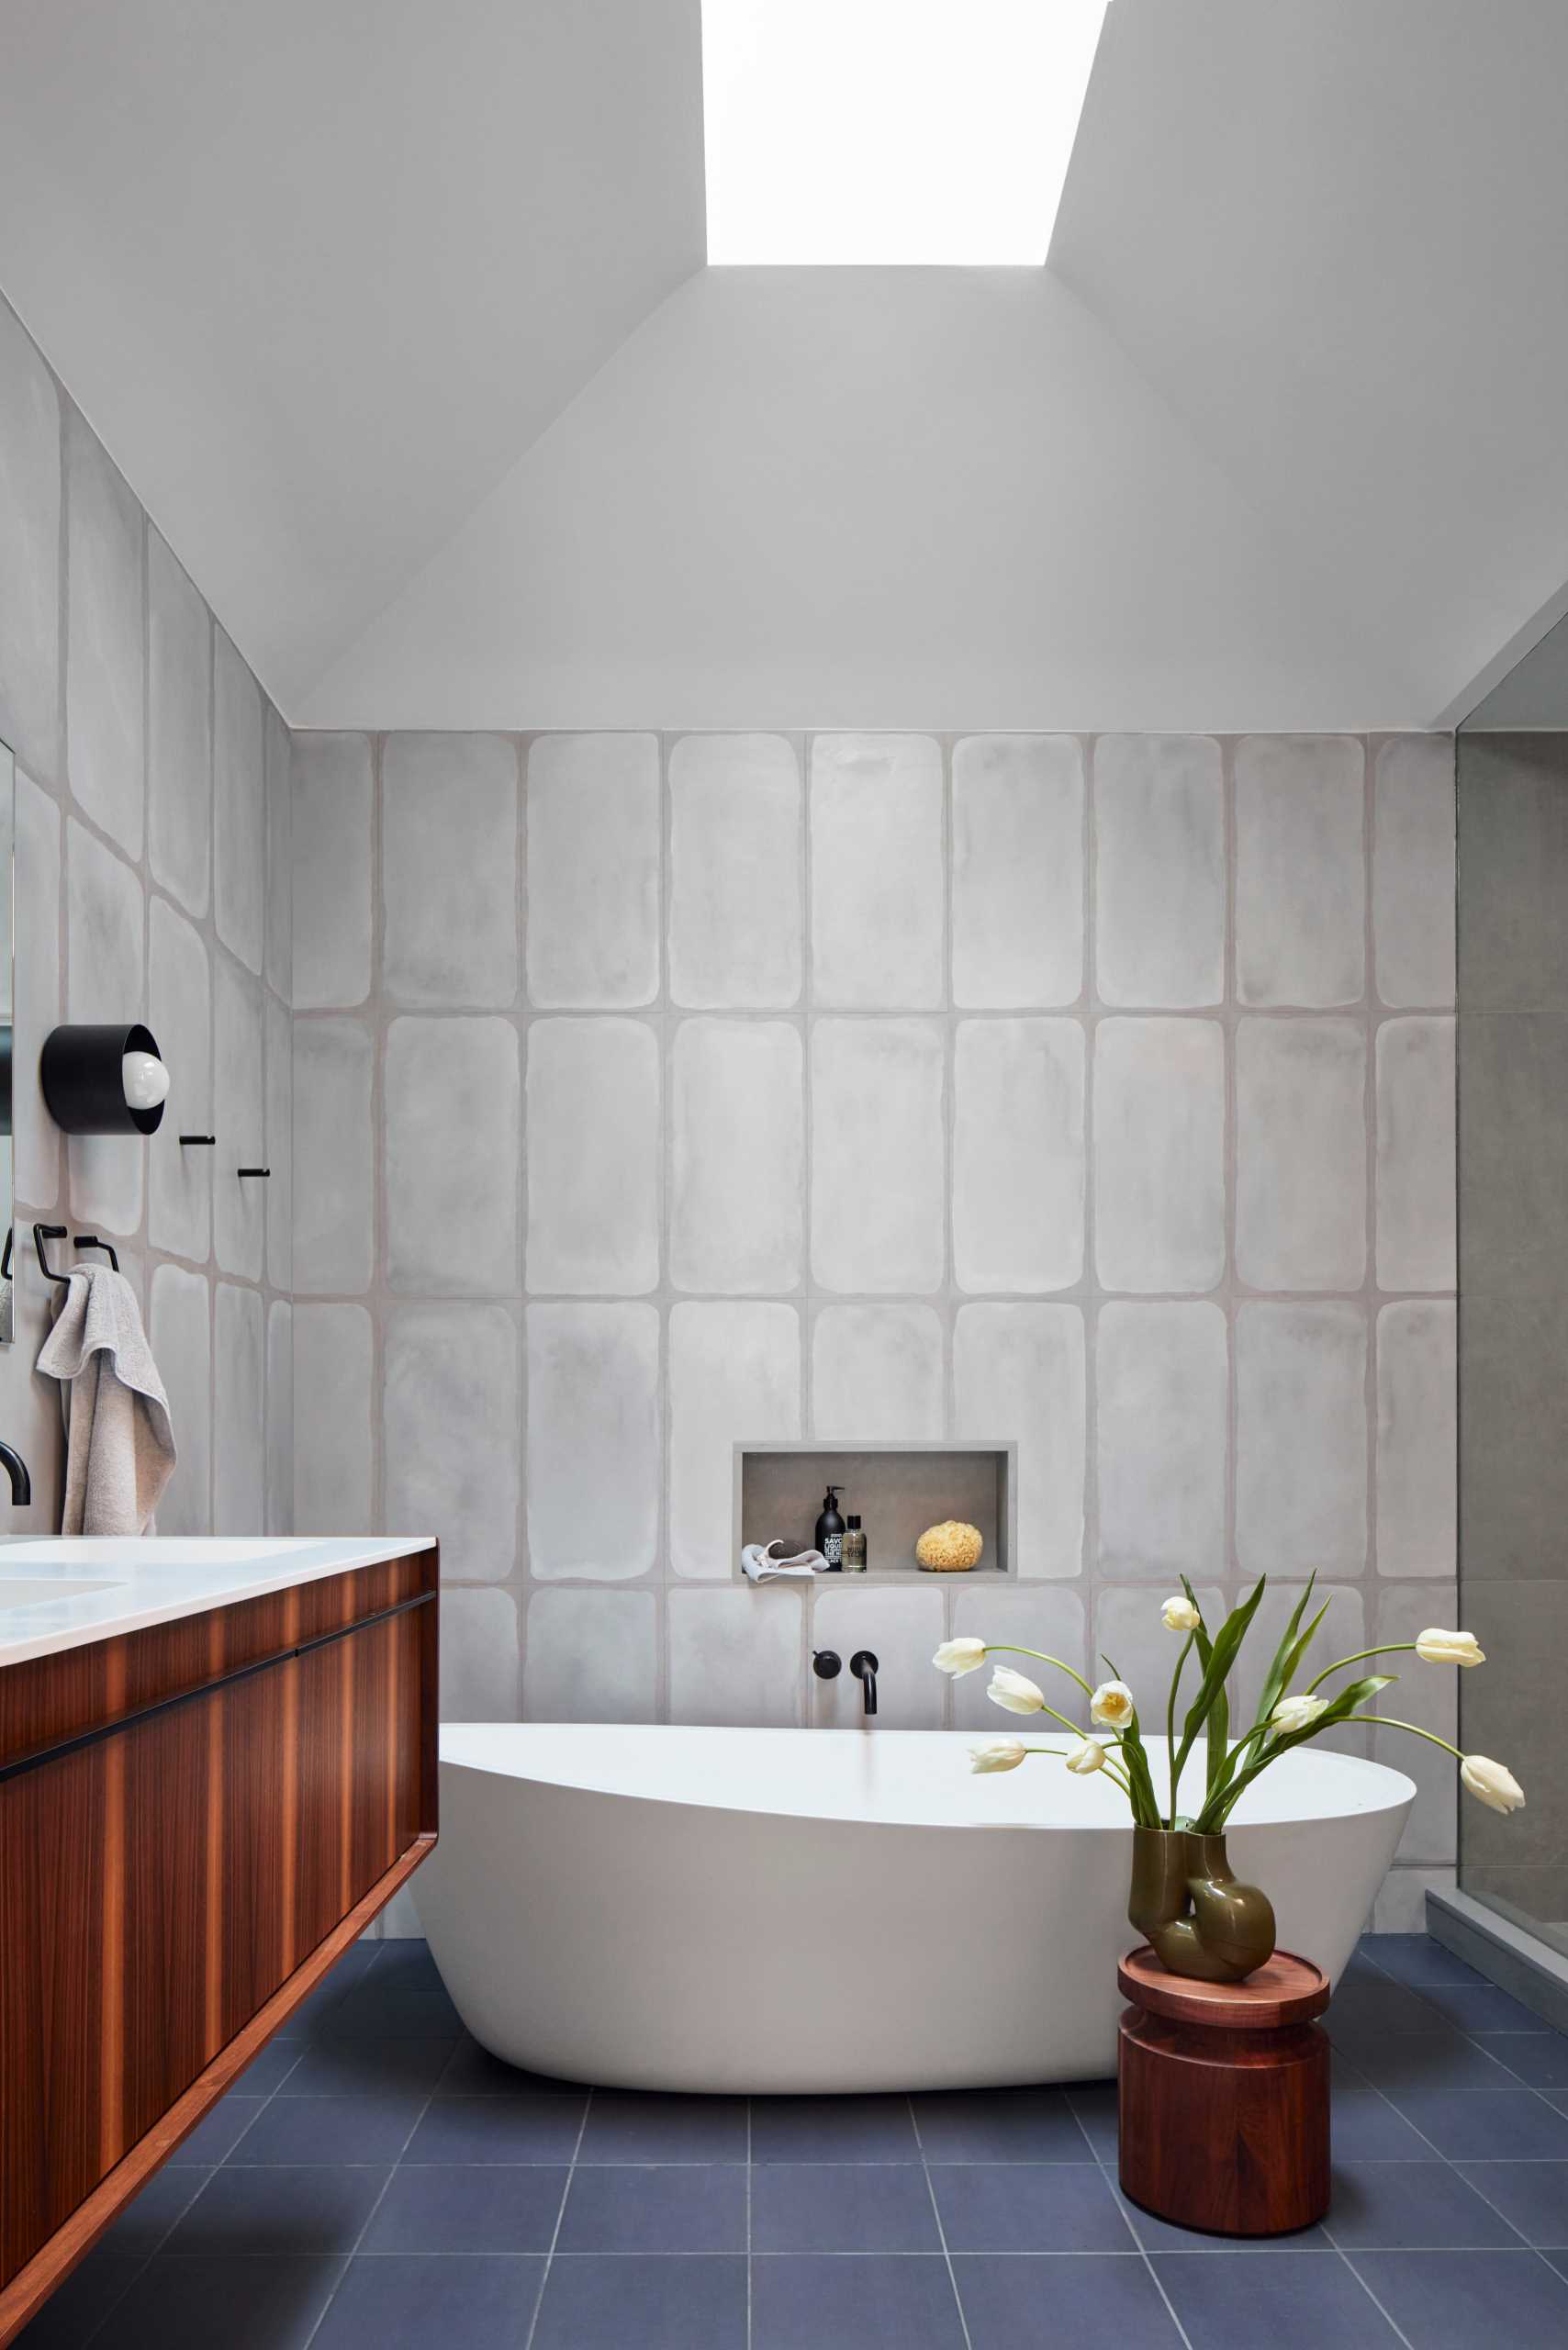 A modern bathroom with a vaulted ceiling, tile-covered walls and floor, a freestanding bathtub with a shelving niche, and a wood vanity.